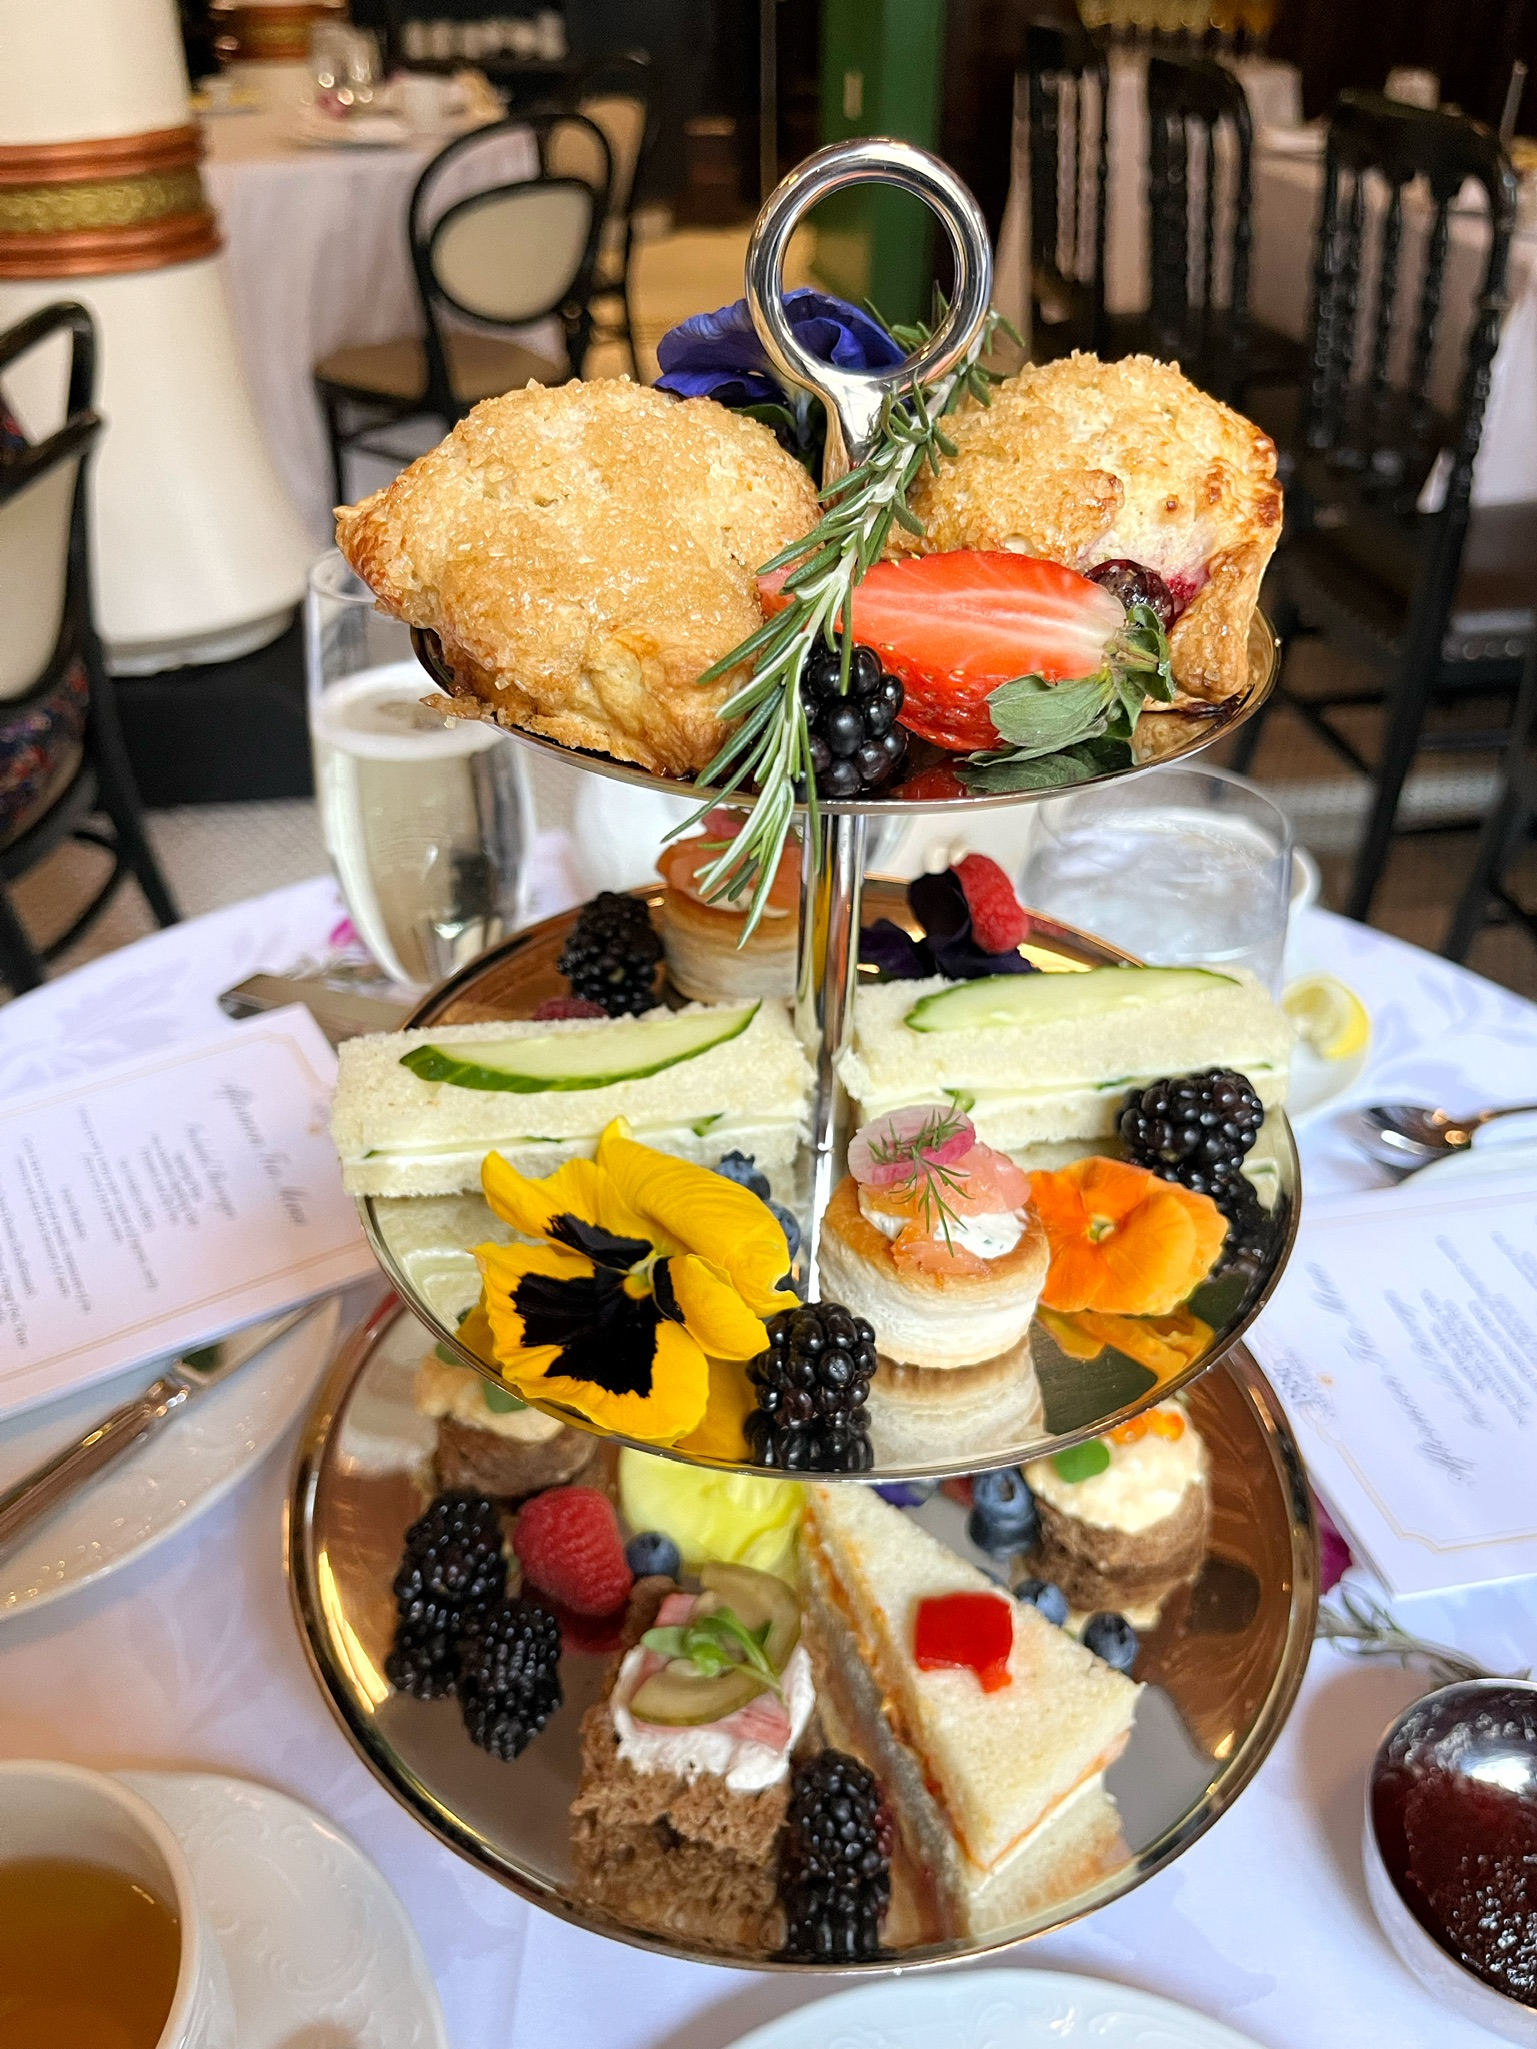 Ritual & Refinement: Afternoon Tea at the Driskill Hotel